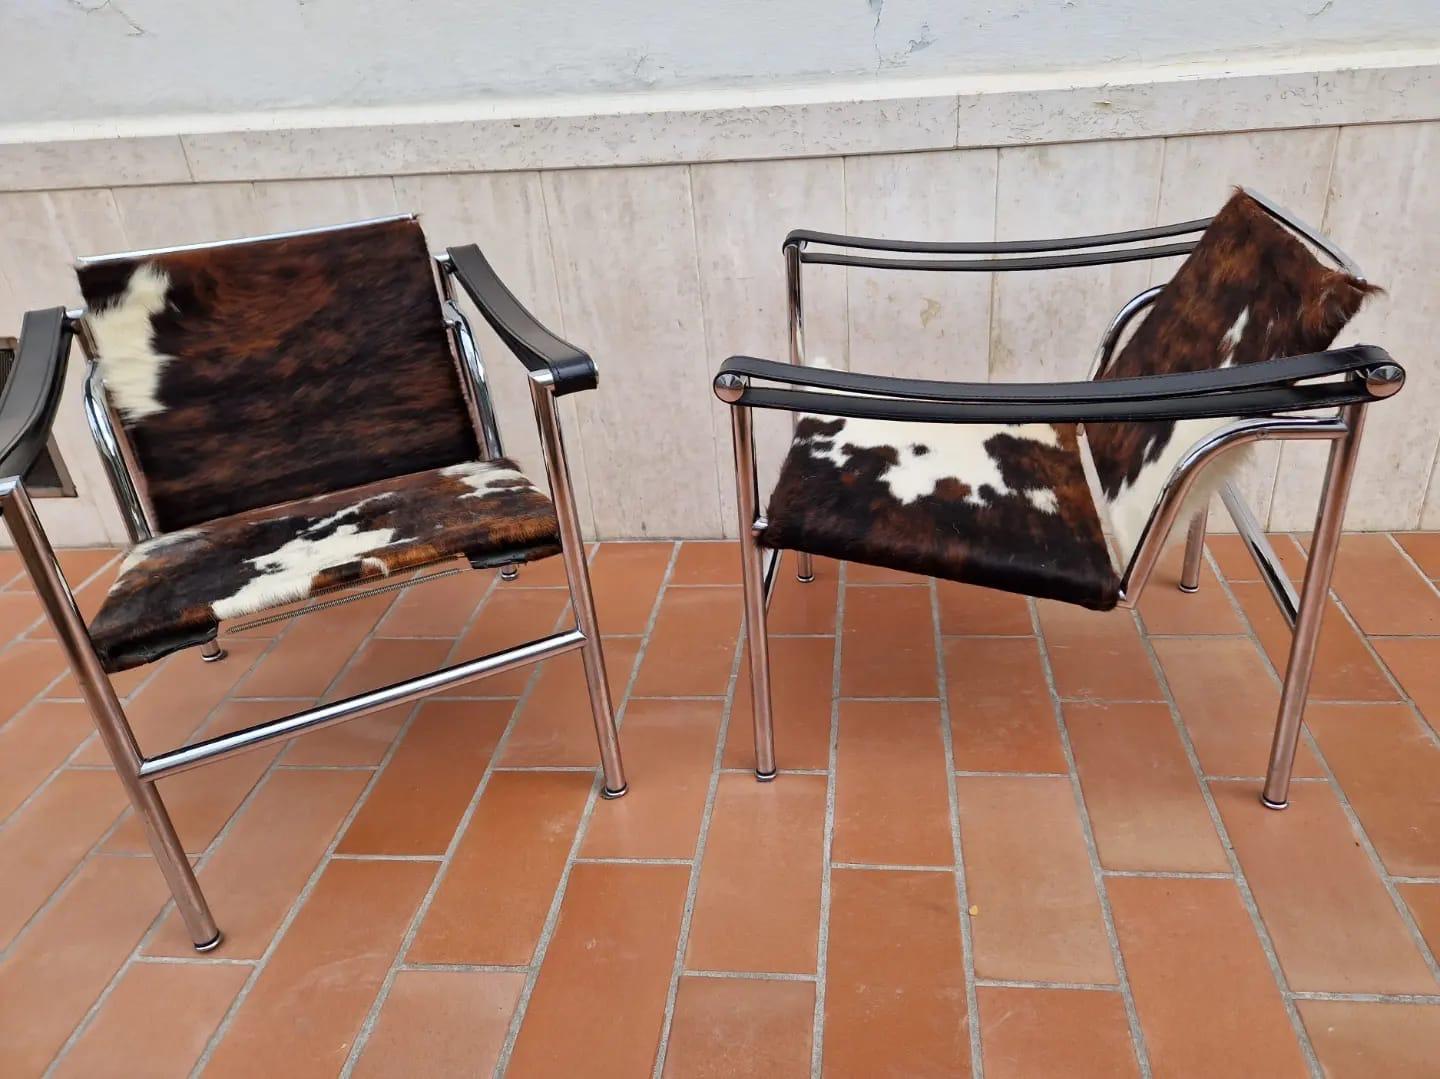 Painted or polished chrome steel work and conversation chairs, pony leather seat and back dating from the 1960s, original with paper certification and serial numbers (attached to photos). 
The tilting backrest promotes continuity of rest in